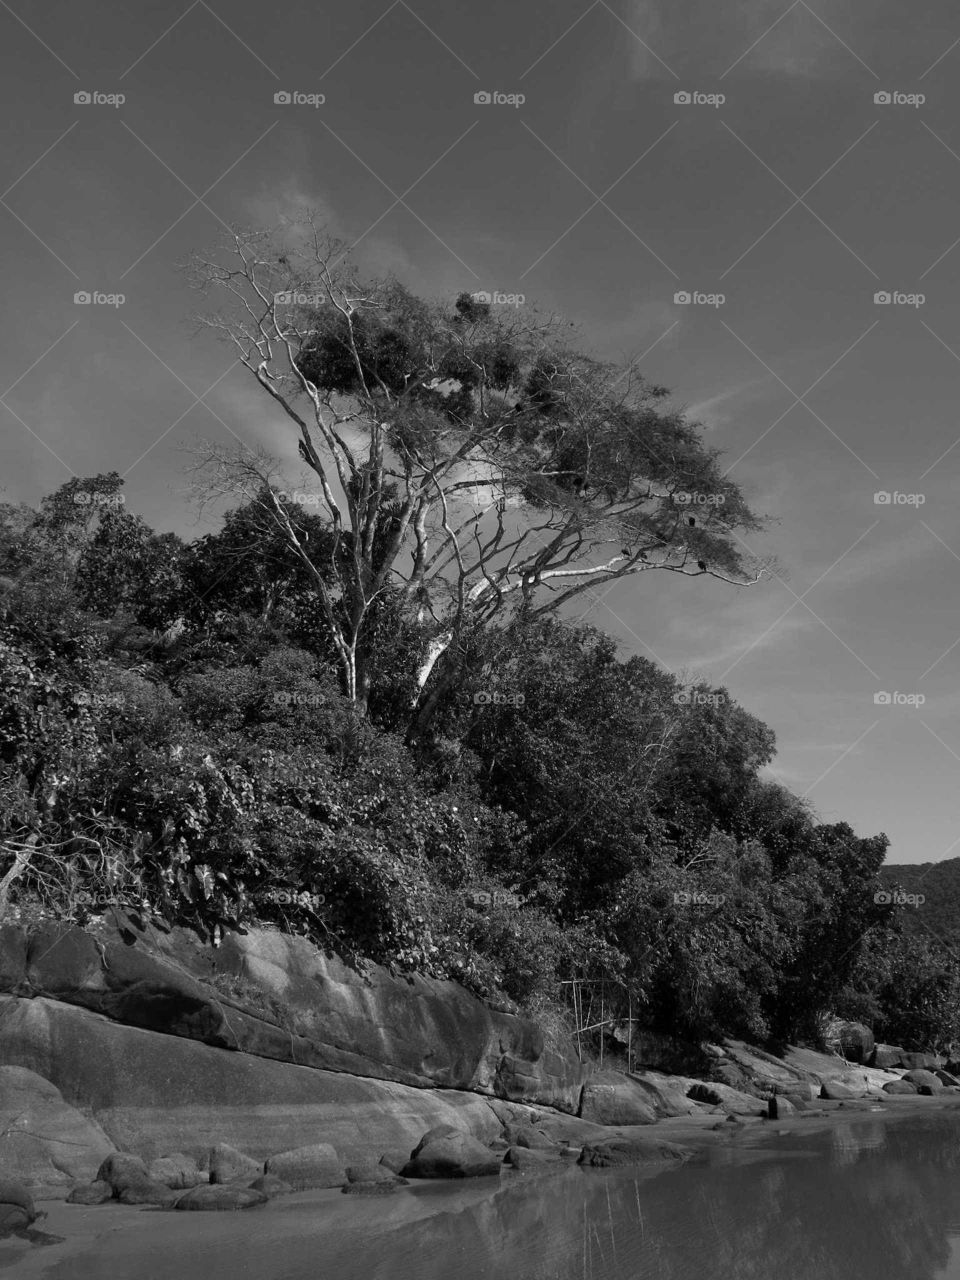 Black and white photography of Vultures in a tree, at Ubatuba's beack, right on the ocean rocks. Suck a beautiful scene, with the clouds behind the tree.